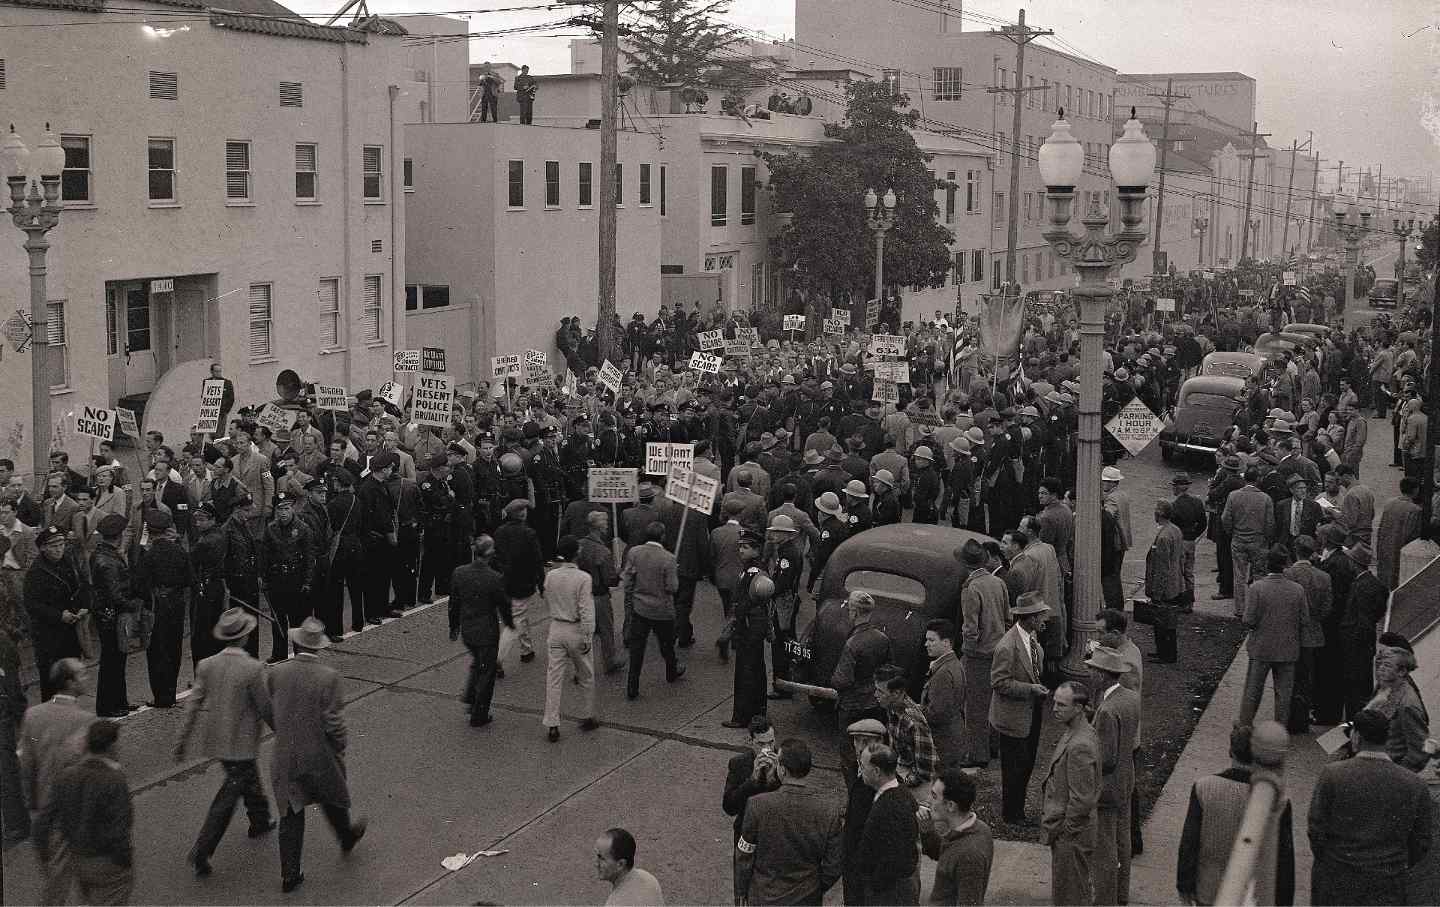 Pickets march between rows of watchful police during the biggest demonstration yet staged by The Conference of Studio Unions, at Columbia Studios during the move strike on Oct. 26, 1946.